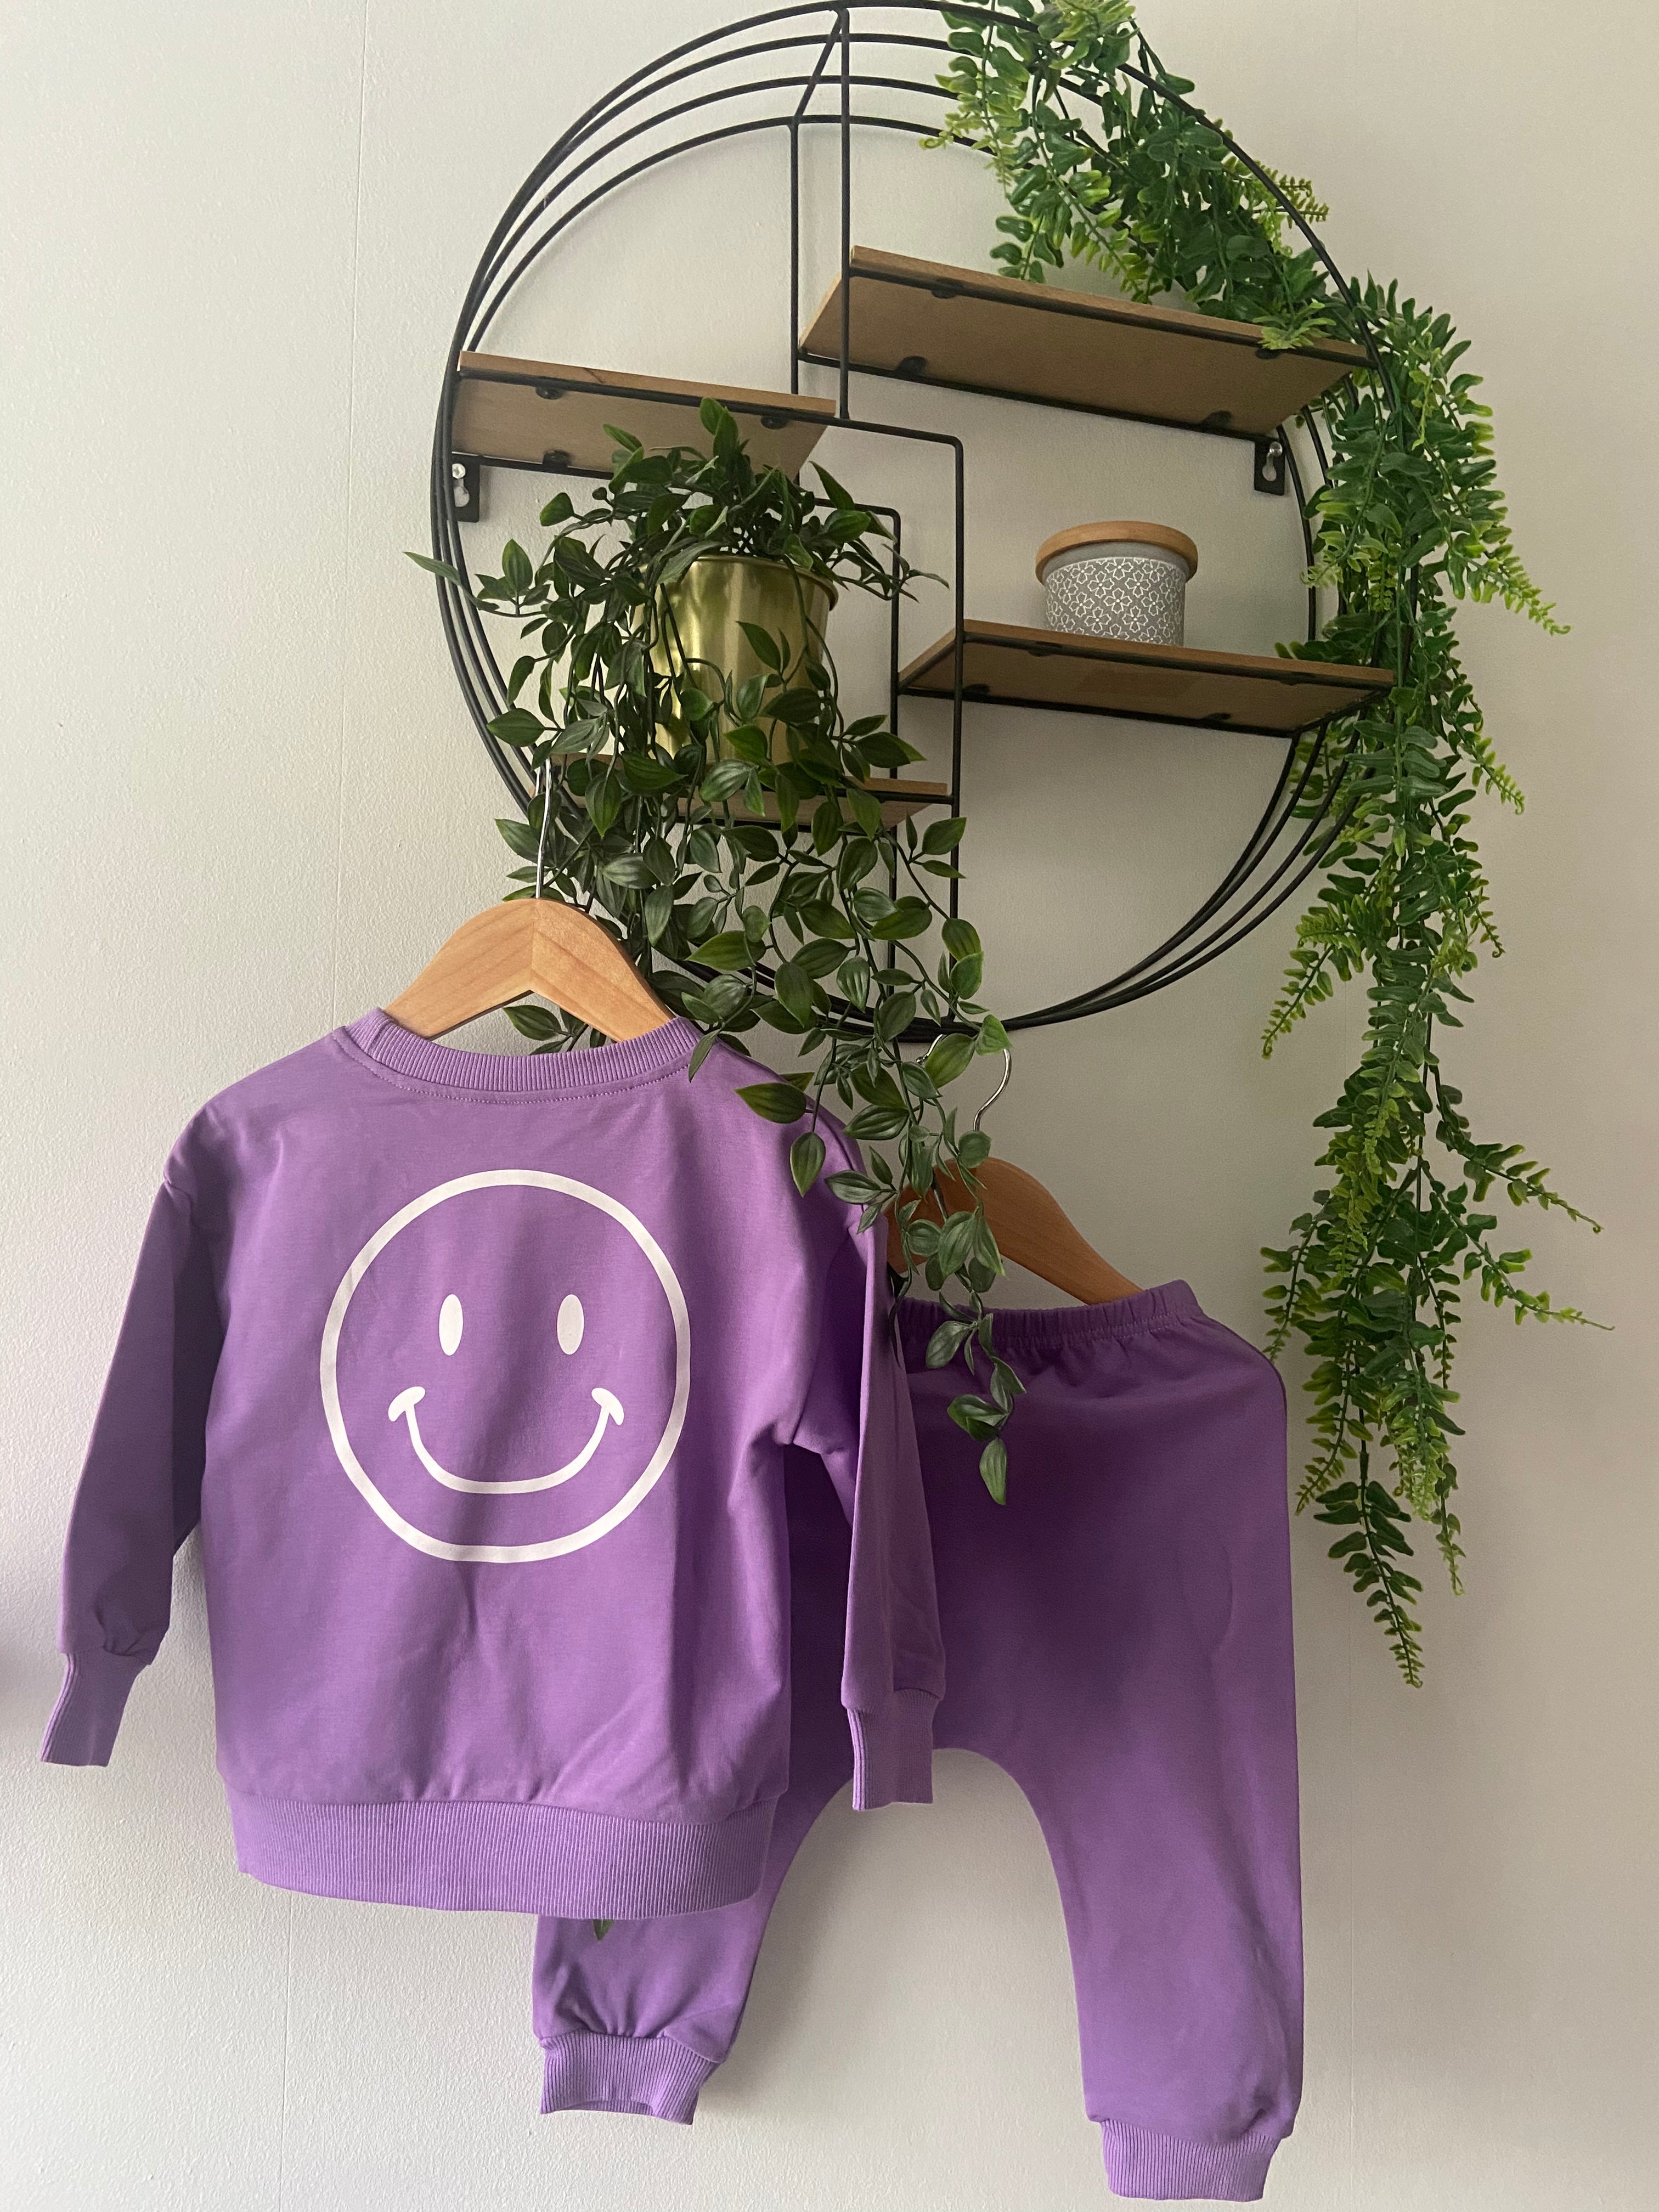 NELLIE Hi Smiley Sweater and Joggers